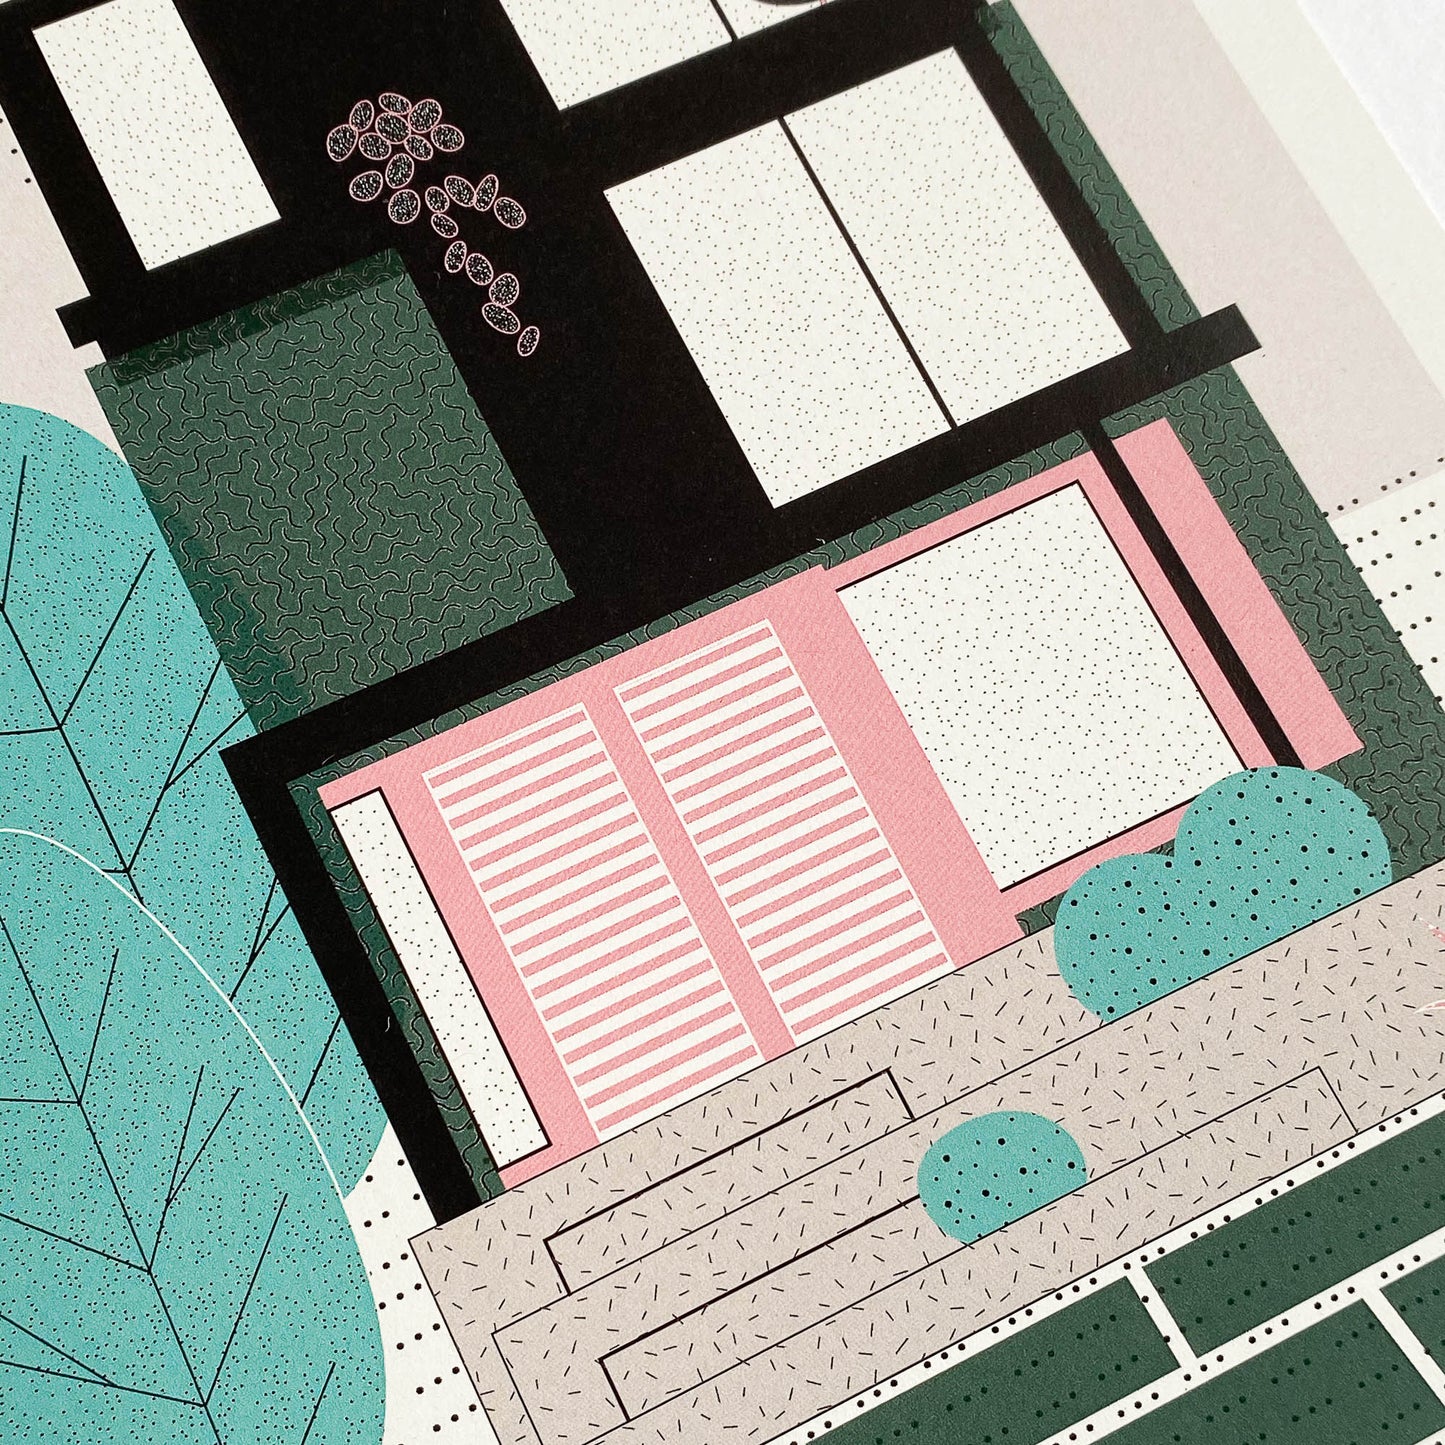 Green Mid Century Townhouse Art Print by The Print Lass. Detail.